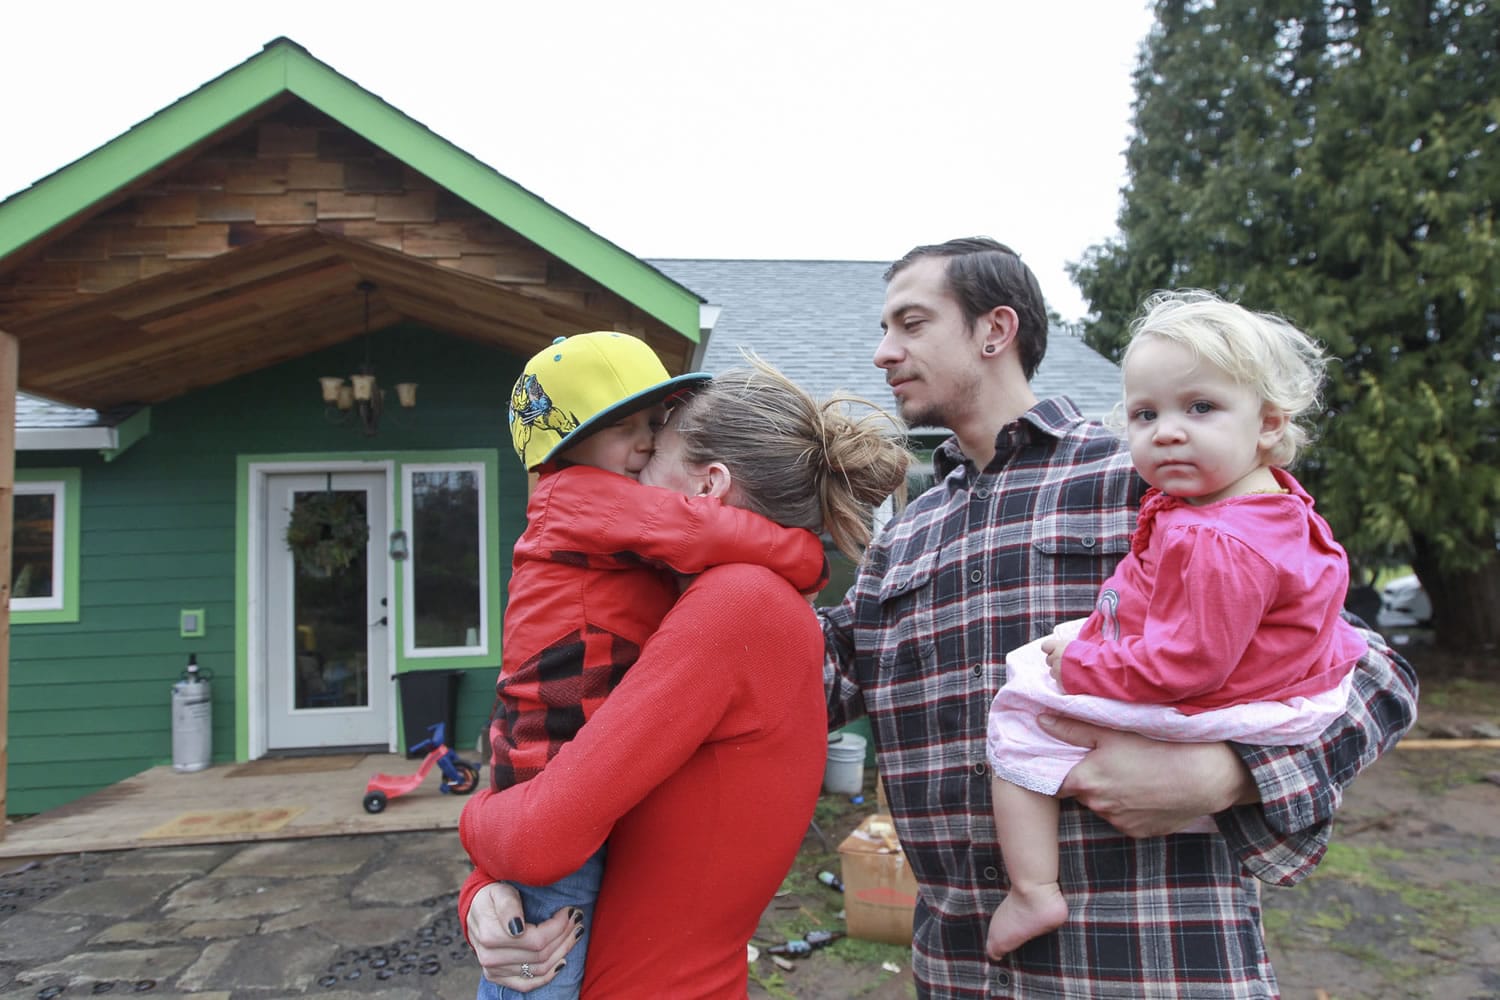 Patricia Kent and Dillon Haggerty, pictured with their son, Quintin, and daughter, Cadence, spent the last year renovating a dilapidated farmhouse into their dream home using natural building practices.